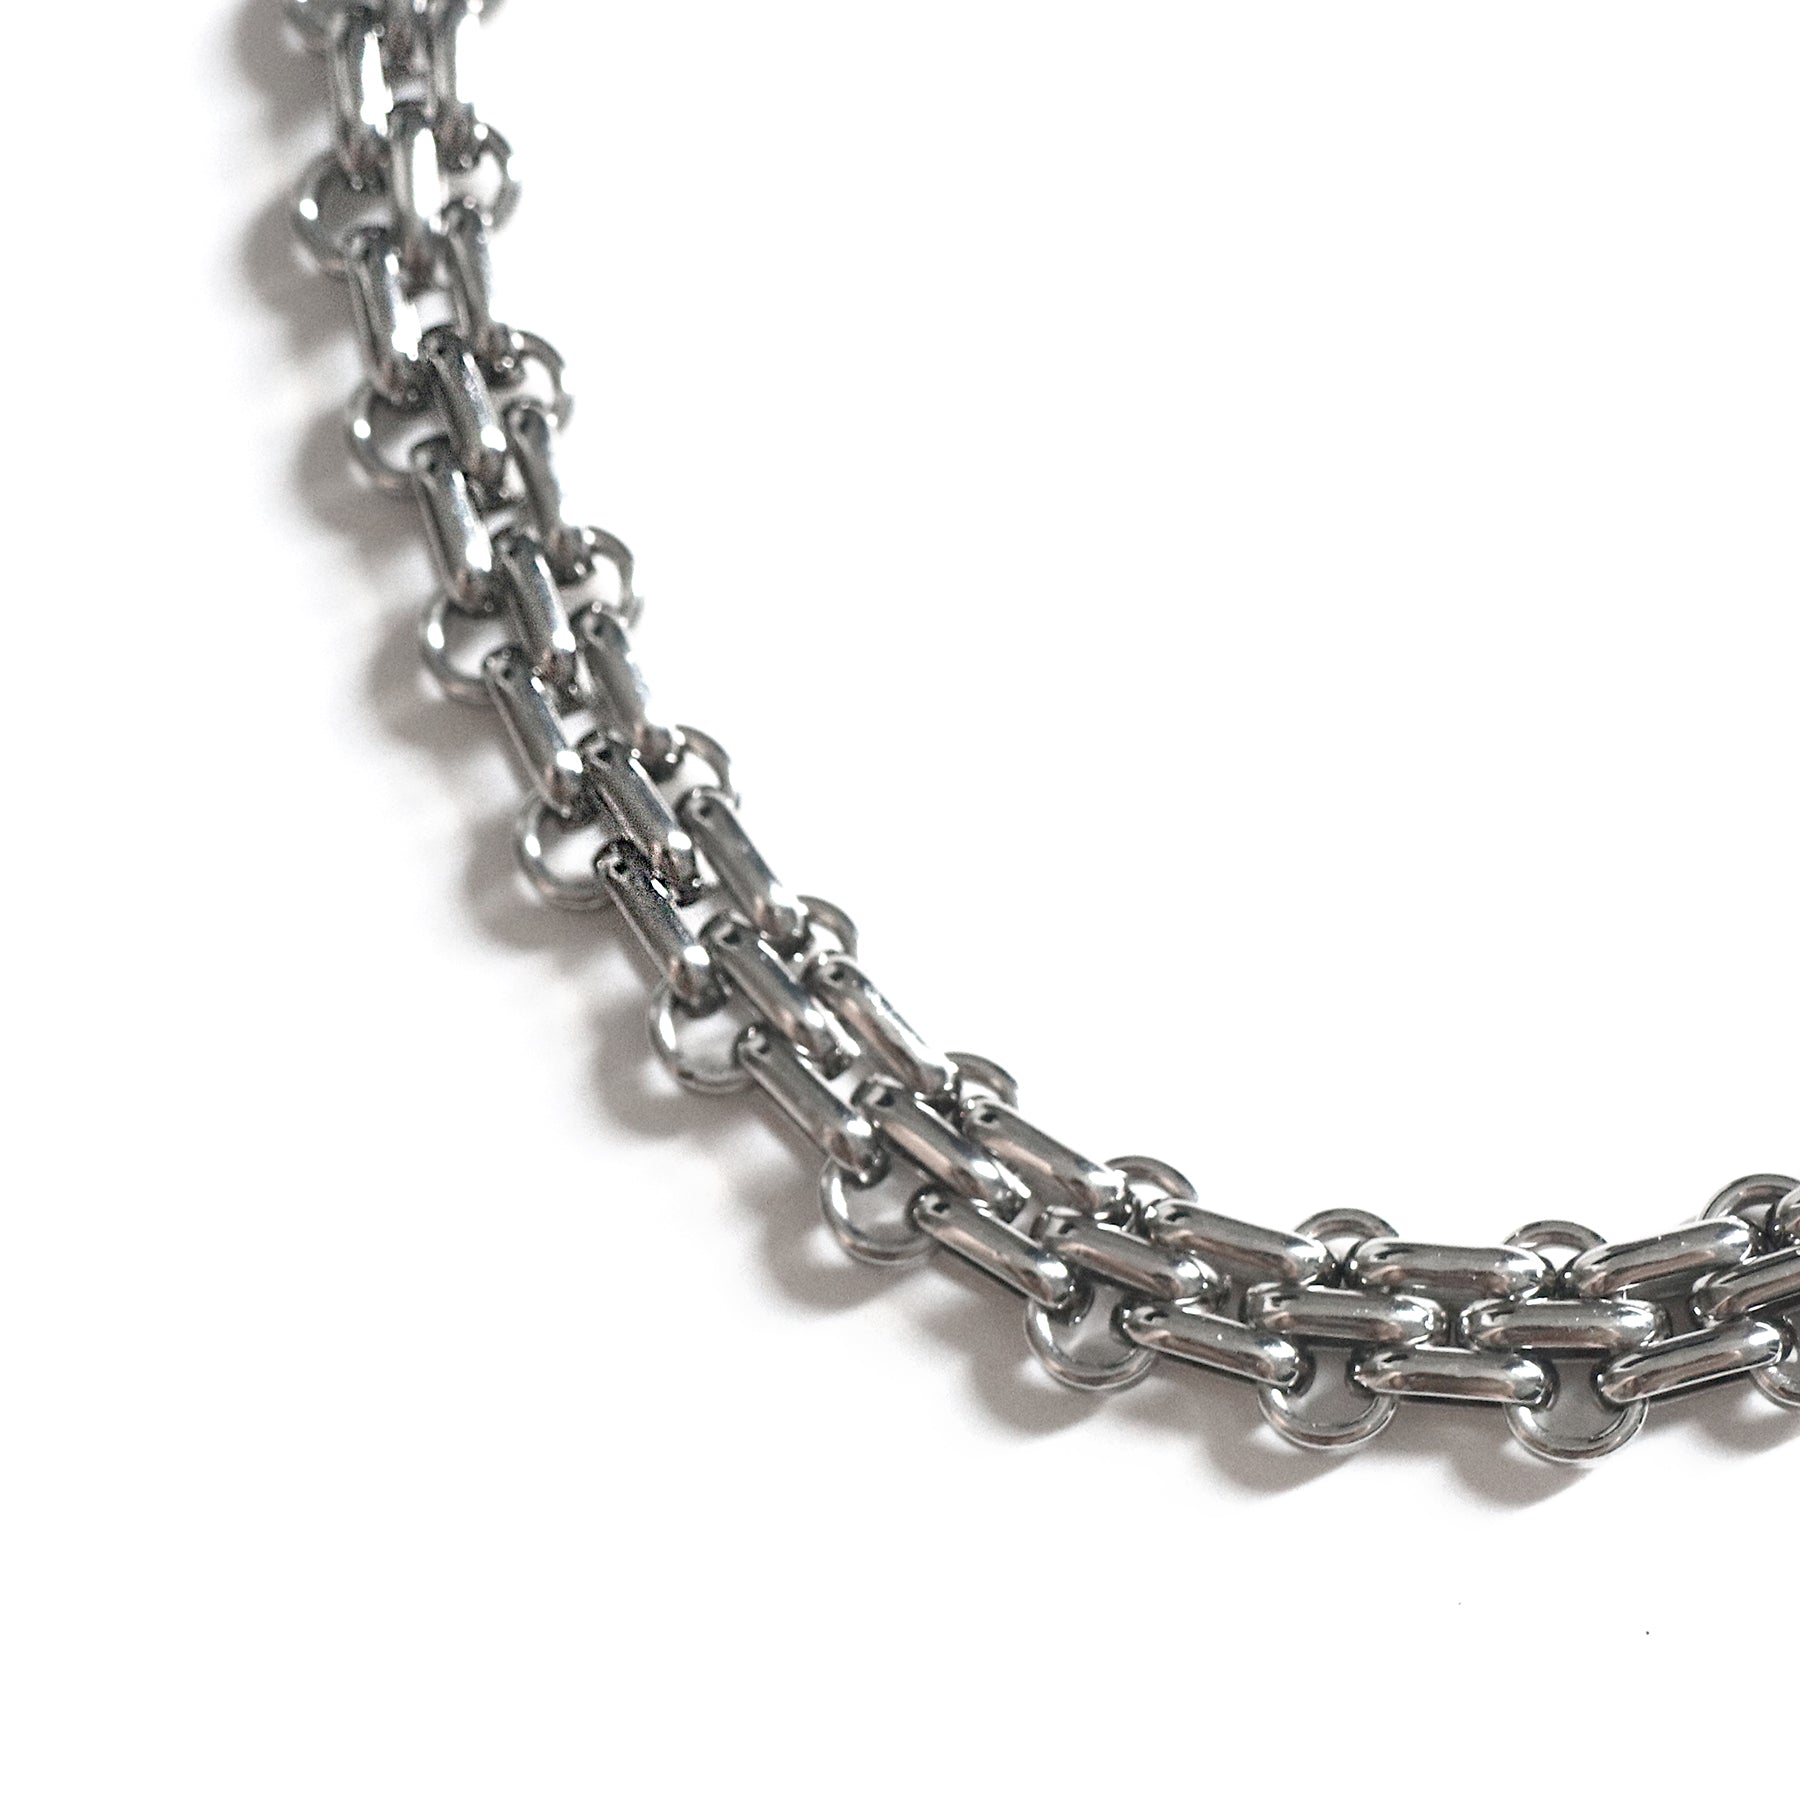 Panther Chain Necklace (unisex) - Chainless Brain